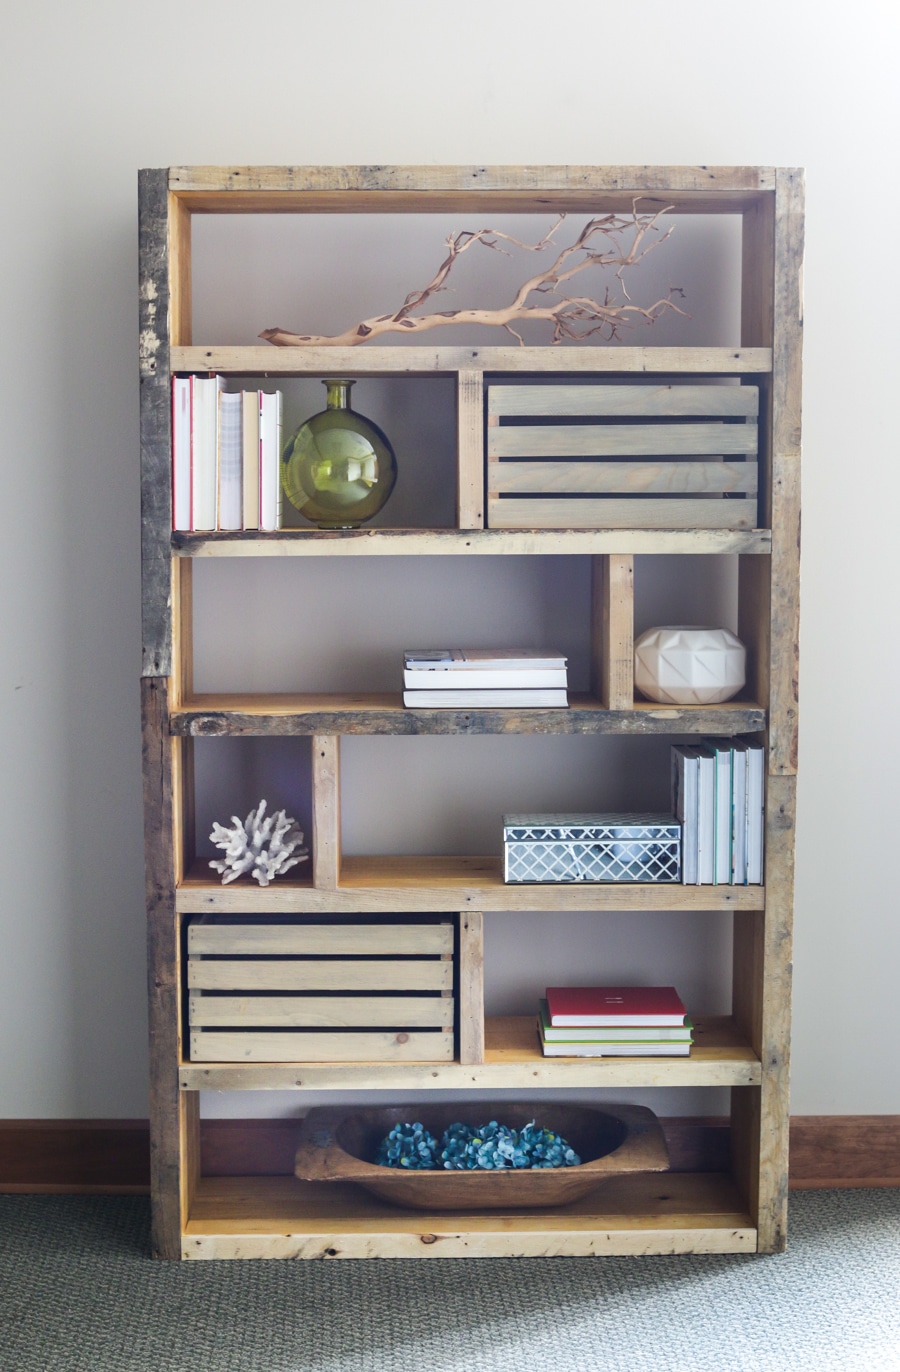 How to build a DIY crate pallet bookshelf